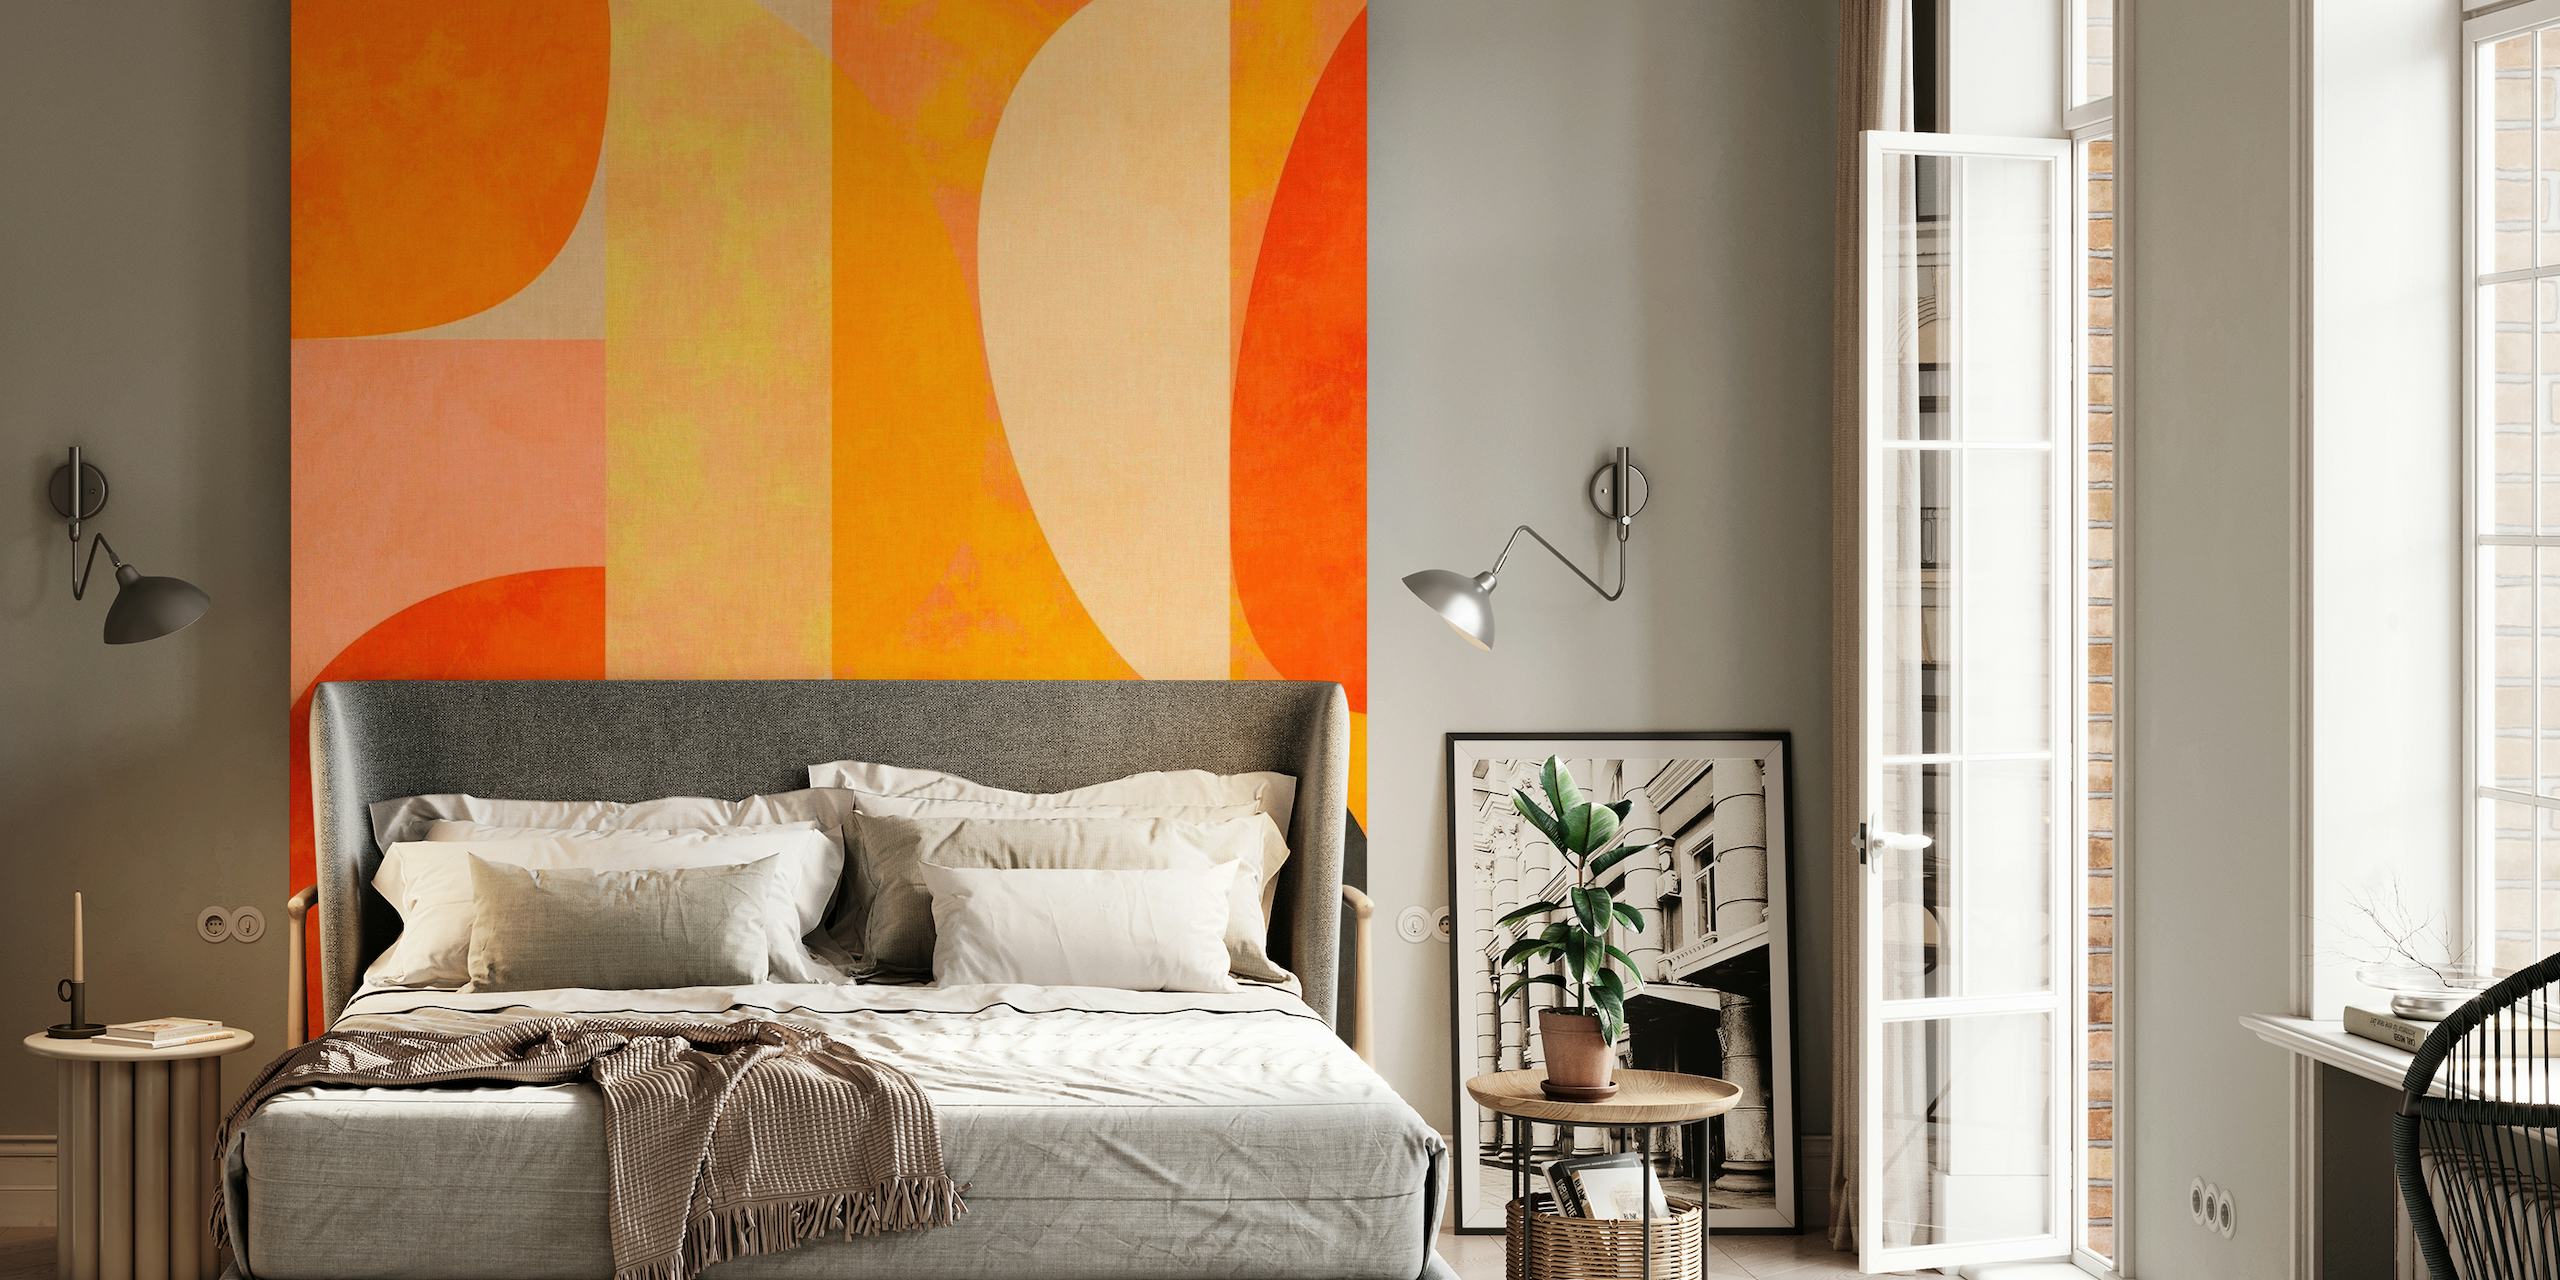 Abstract geometric shapes wall mural in burnt orange, deep red, and earthy tones with black accents